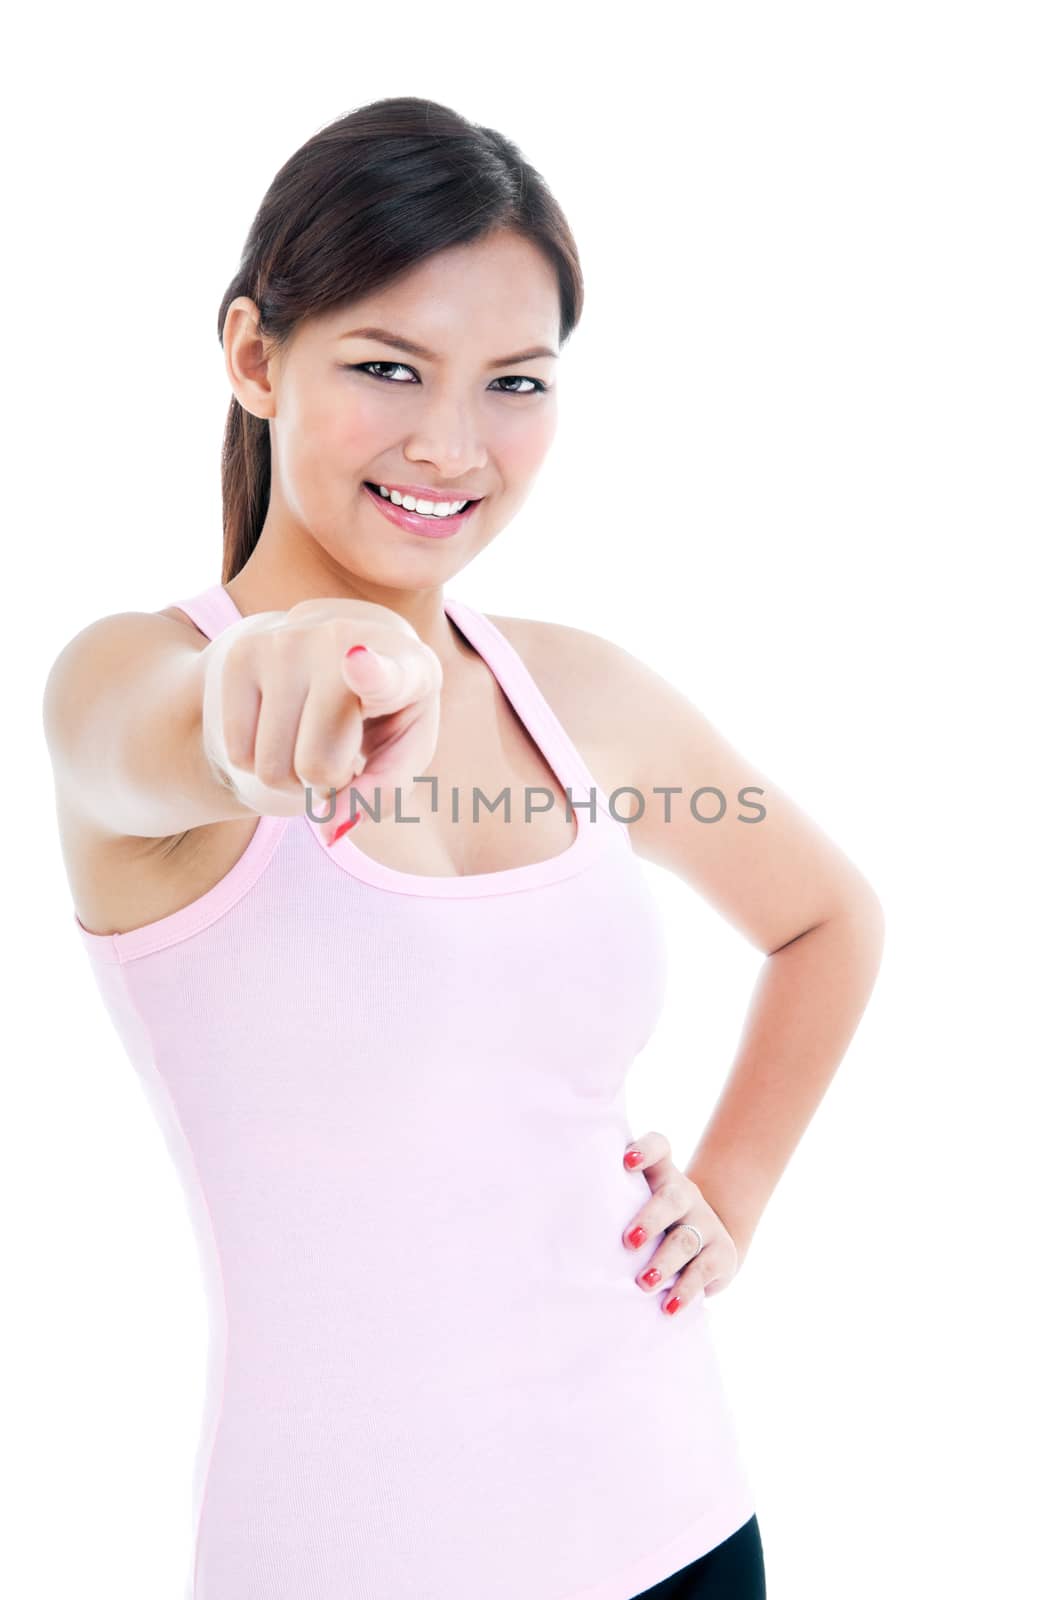 Portrait of a healthy young woman pointing, isolated on white.